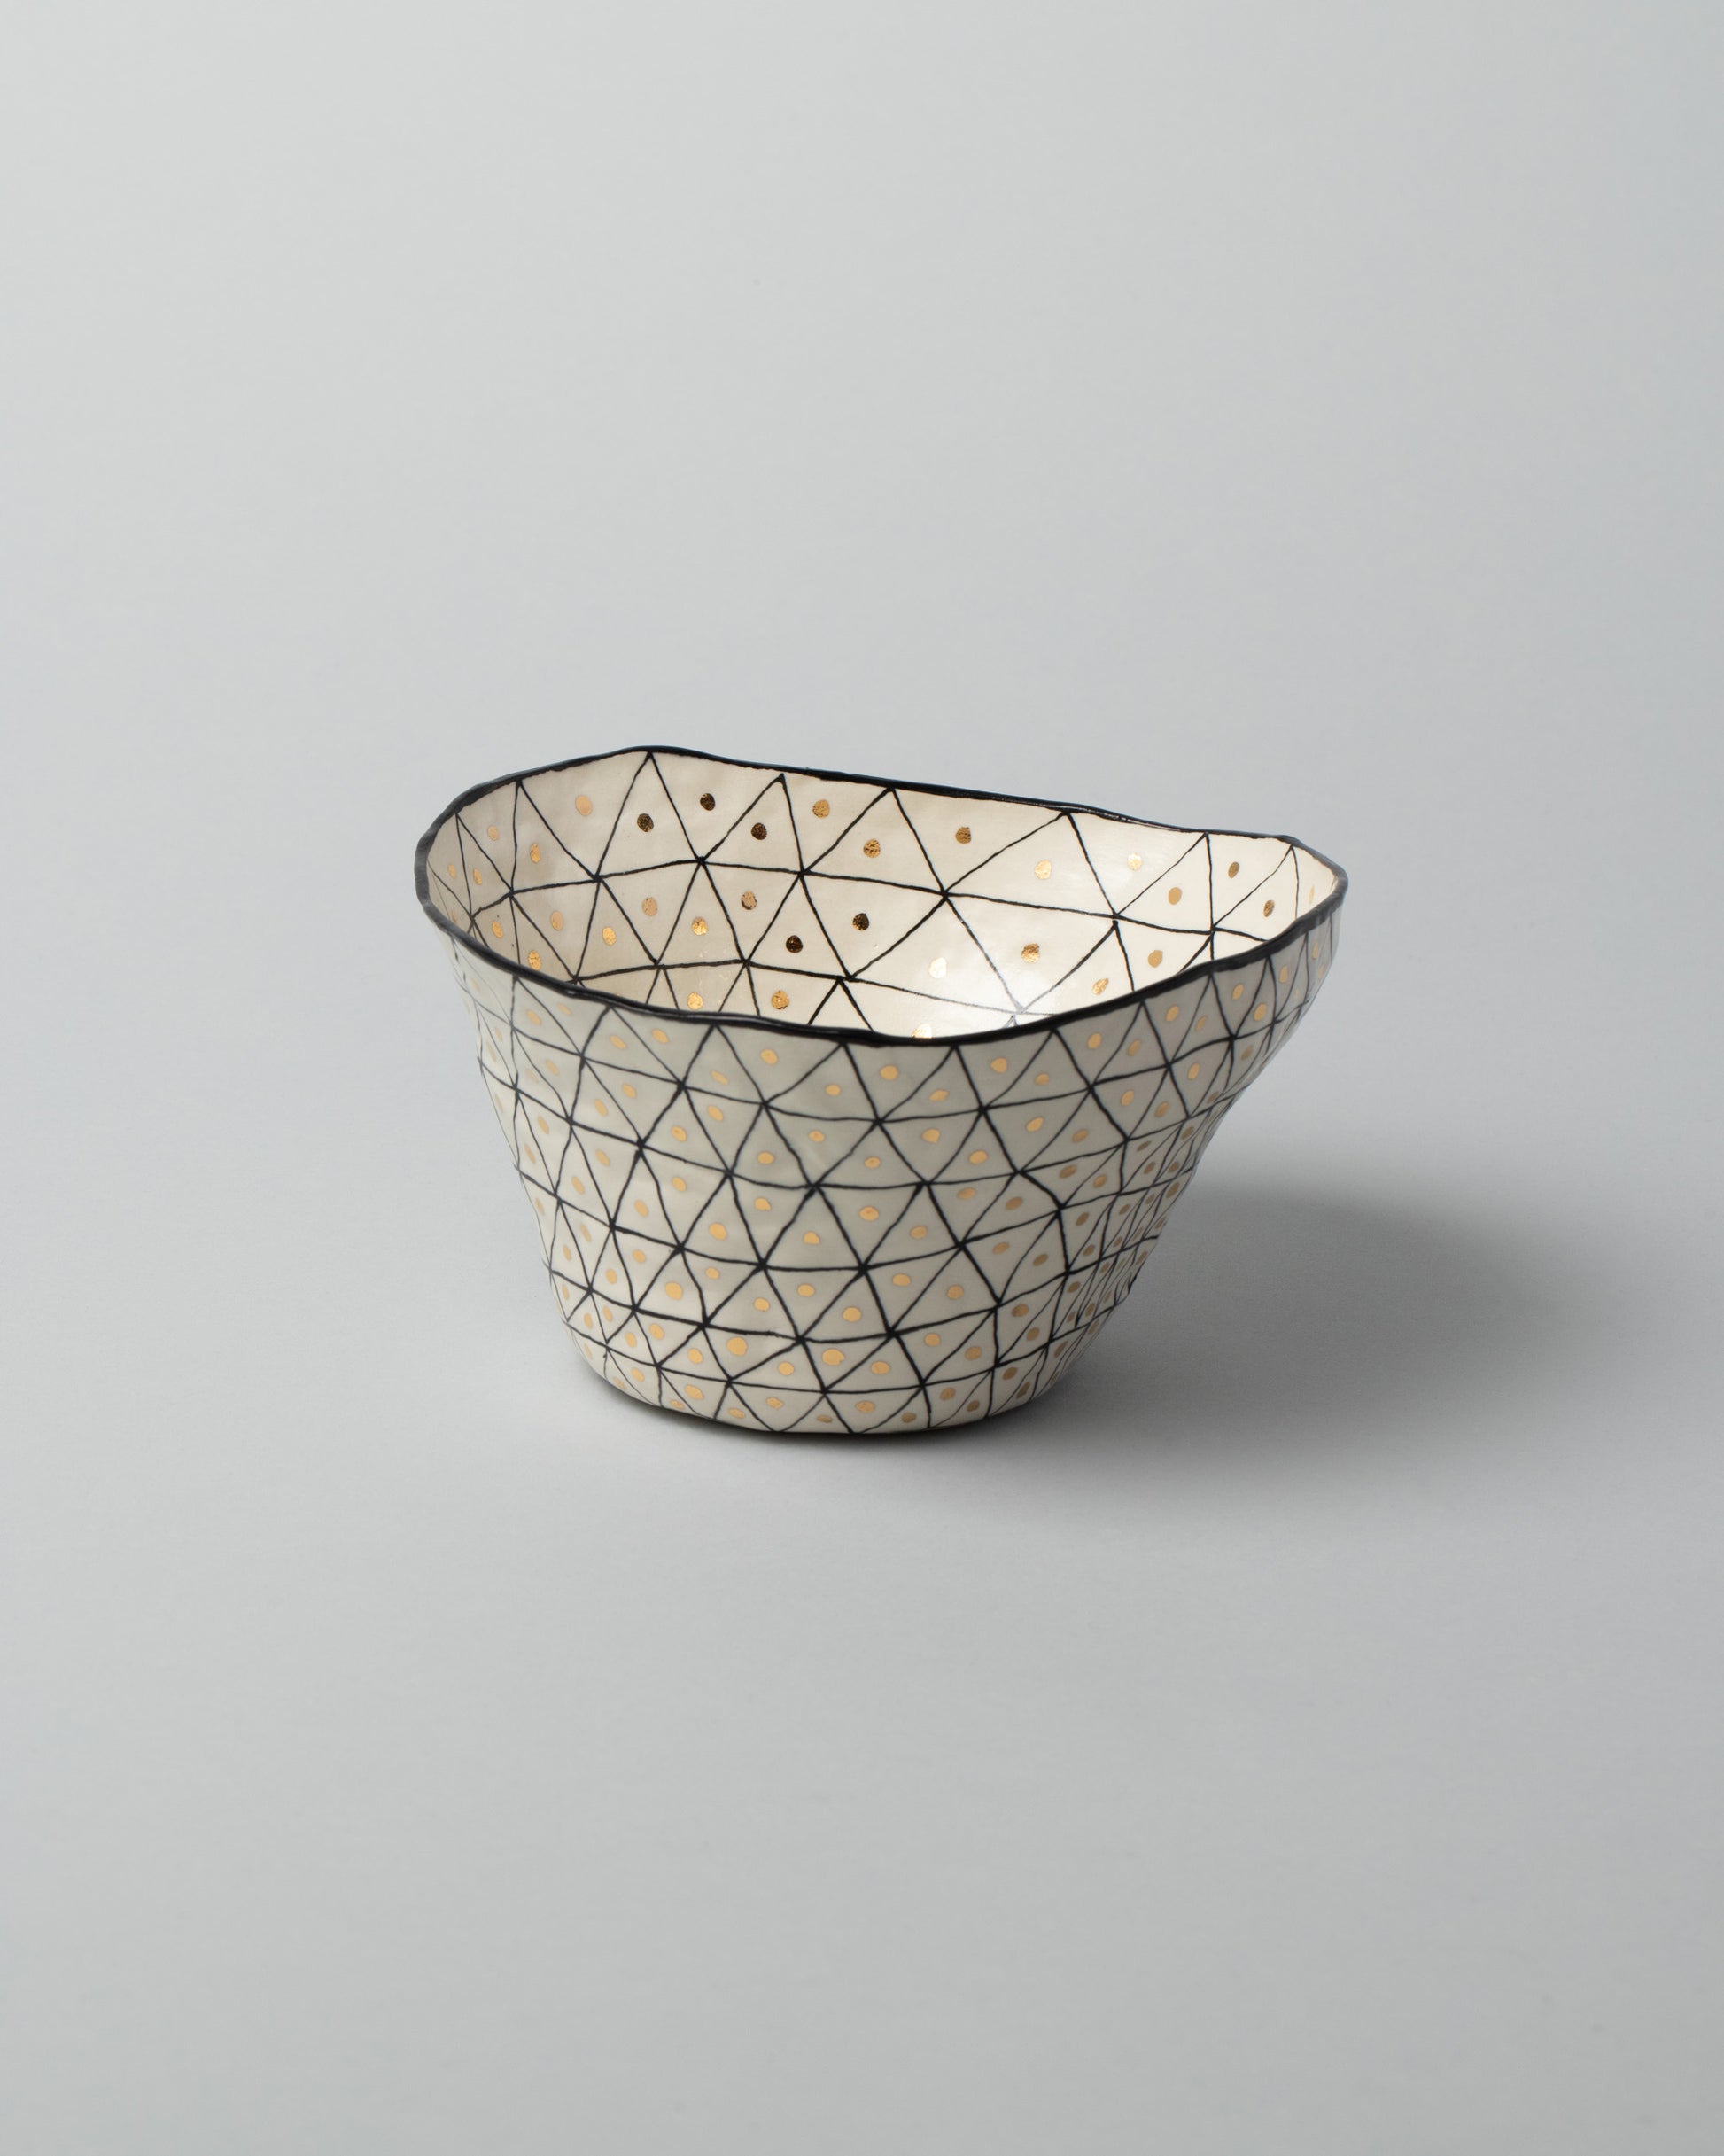 Suzanne Sullivan Two Pinch Bowl on light color background.